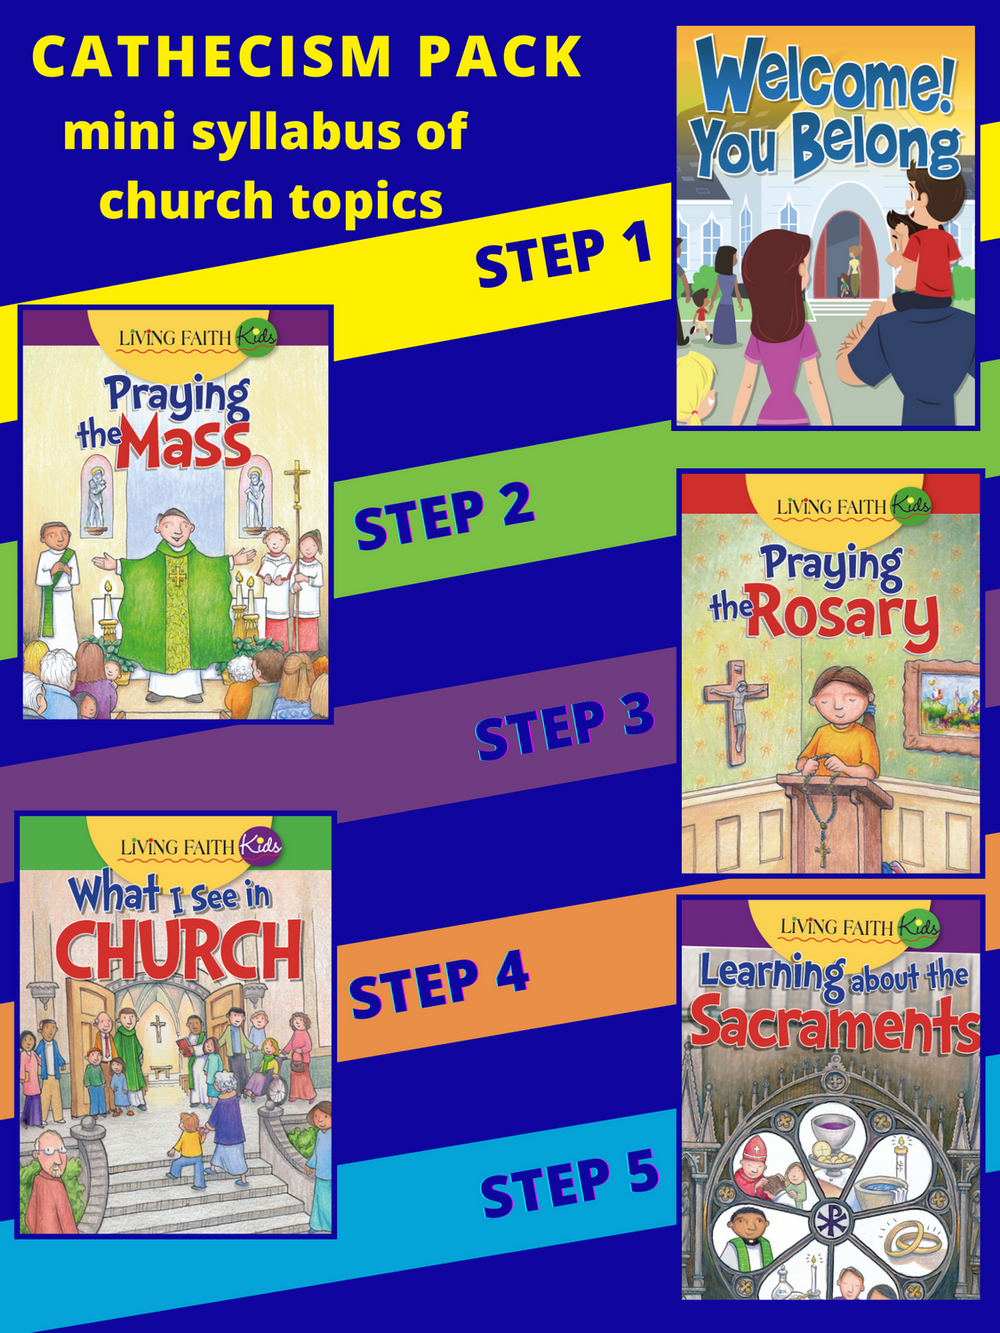 Catechism introduction set